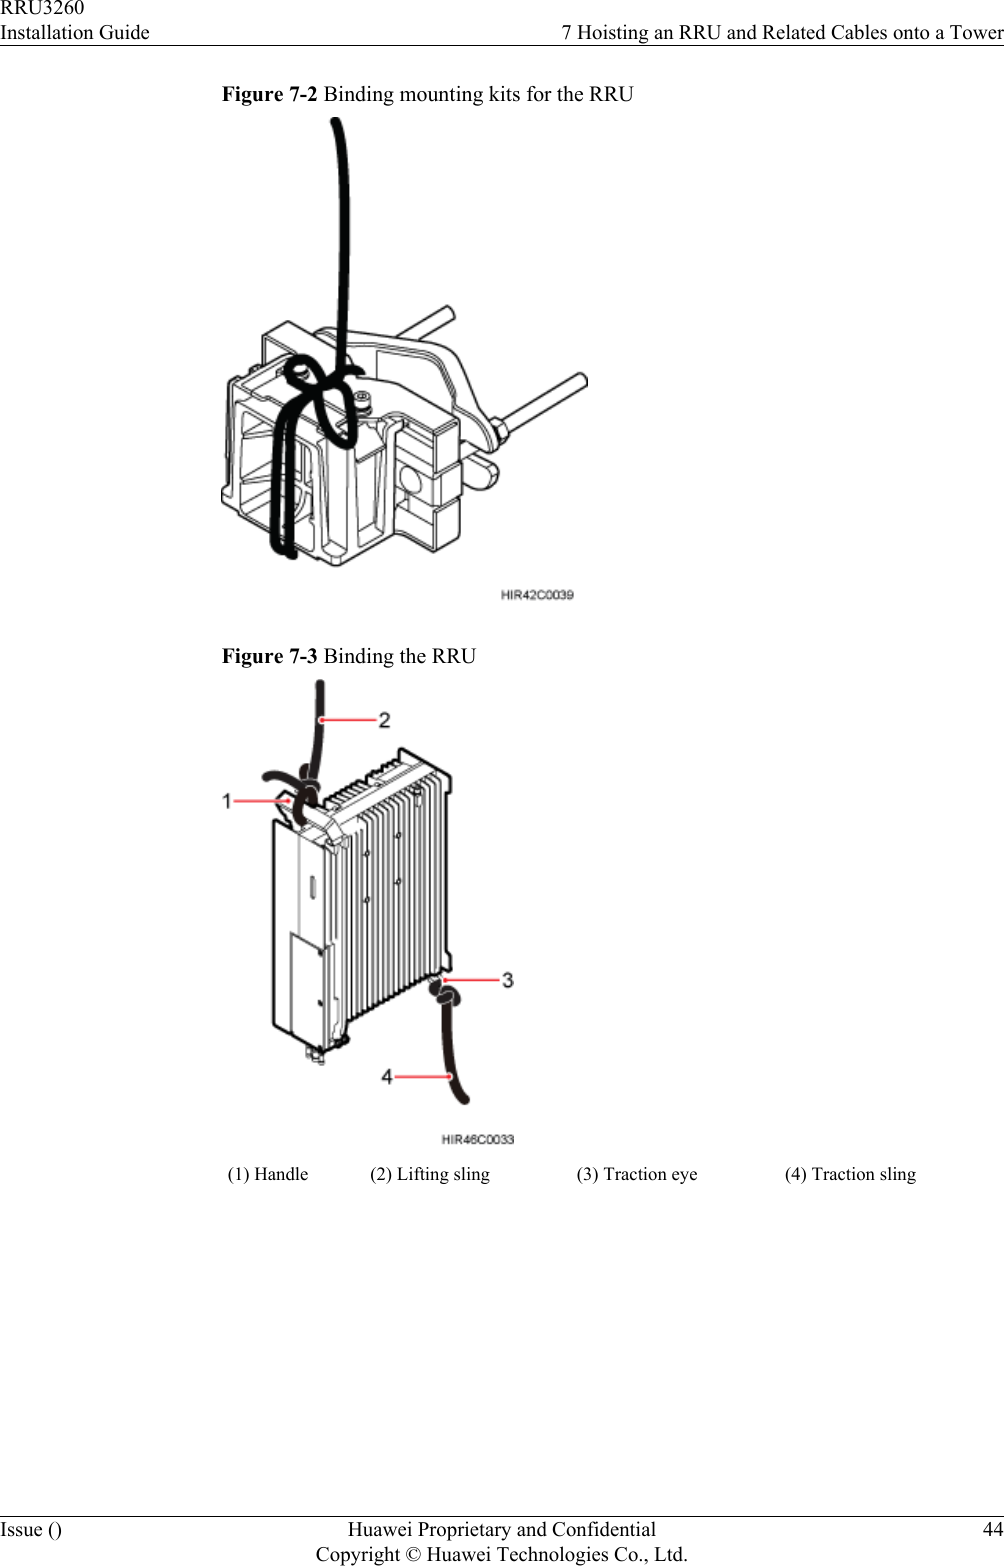 Figure 7-2 Binding mounting kits for the RRUFigure 7-3 Binding the RRU(1) Handle (2) Lifting sling (3) Traction eye (4) Traction sling RRU3260Installation Guide 7 Hoisting an RRU and Related Cables onto a TowerIssue () Huawei Proprietary and ConfidentialCopyright © Huawei Technologies Co., Ltd.44